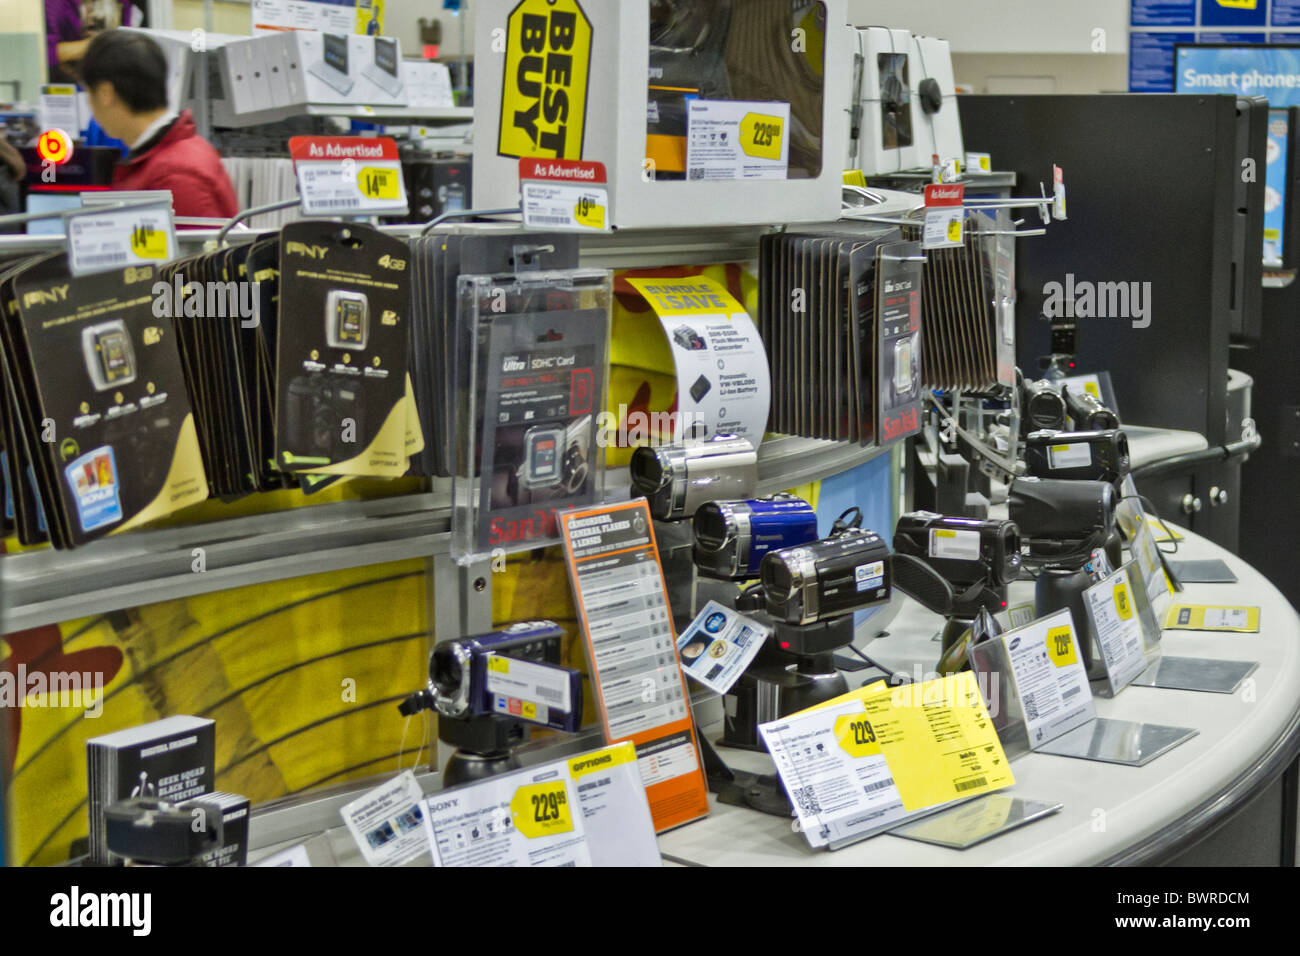 Washington, DC - Best Buy Thanksgiving and Christmas sale. Stock Photo